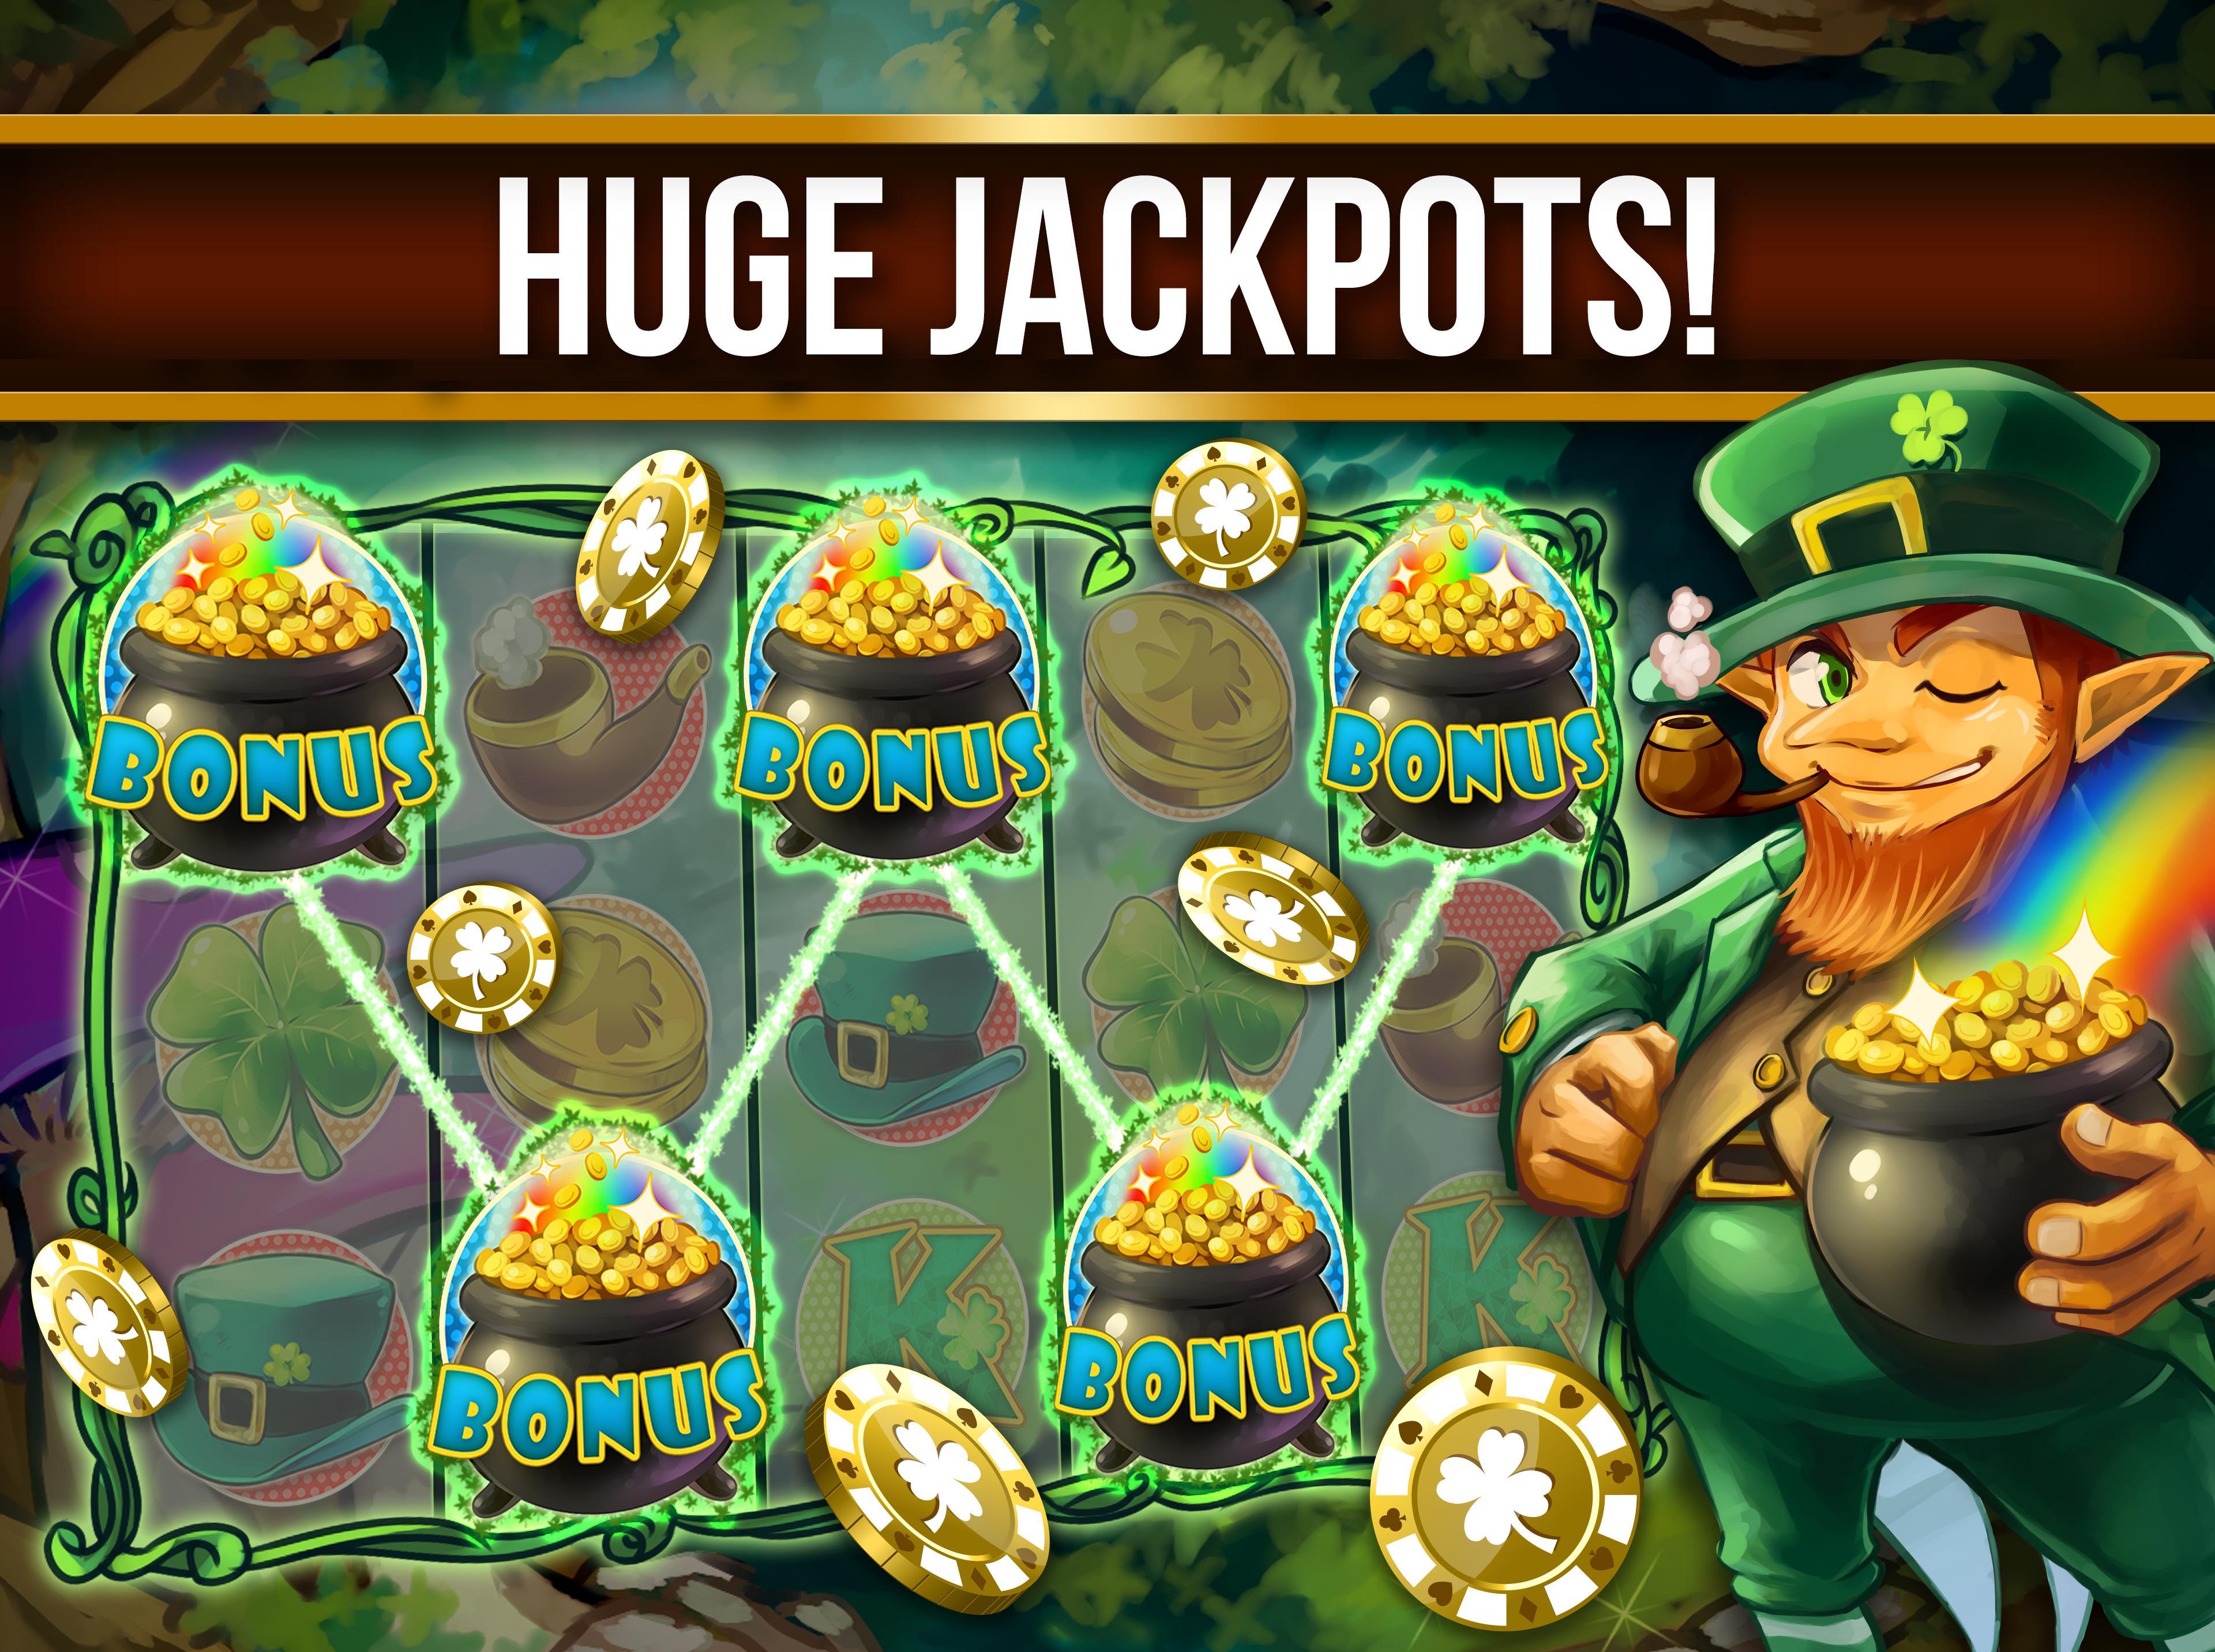 Play penny slot machines online free